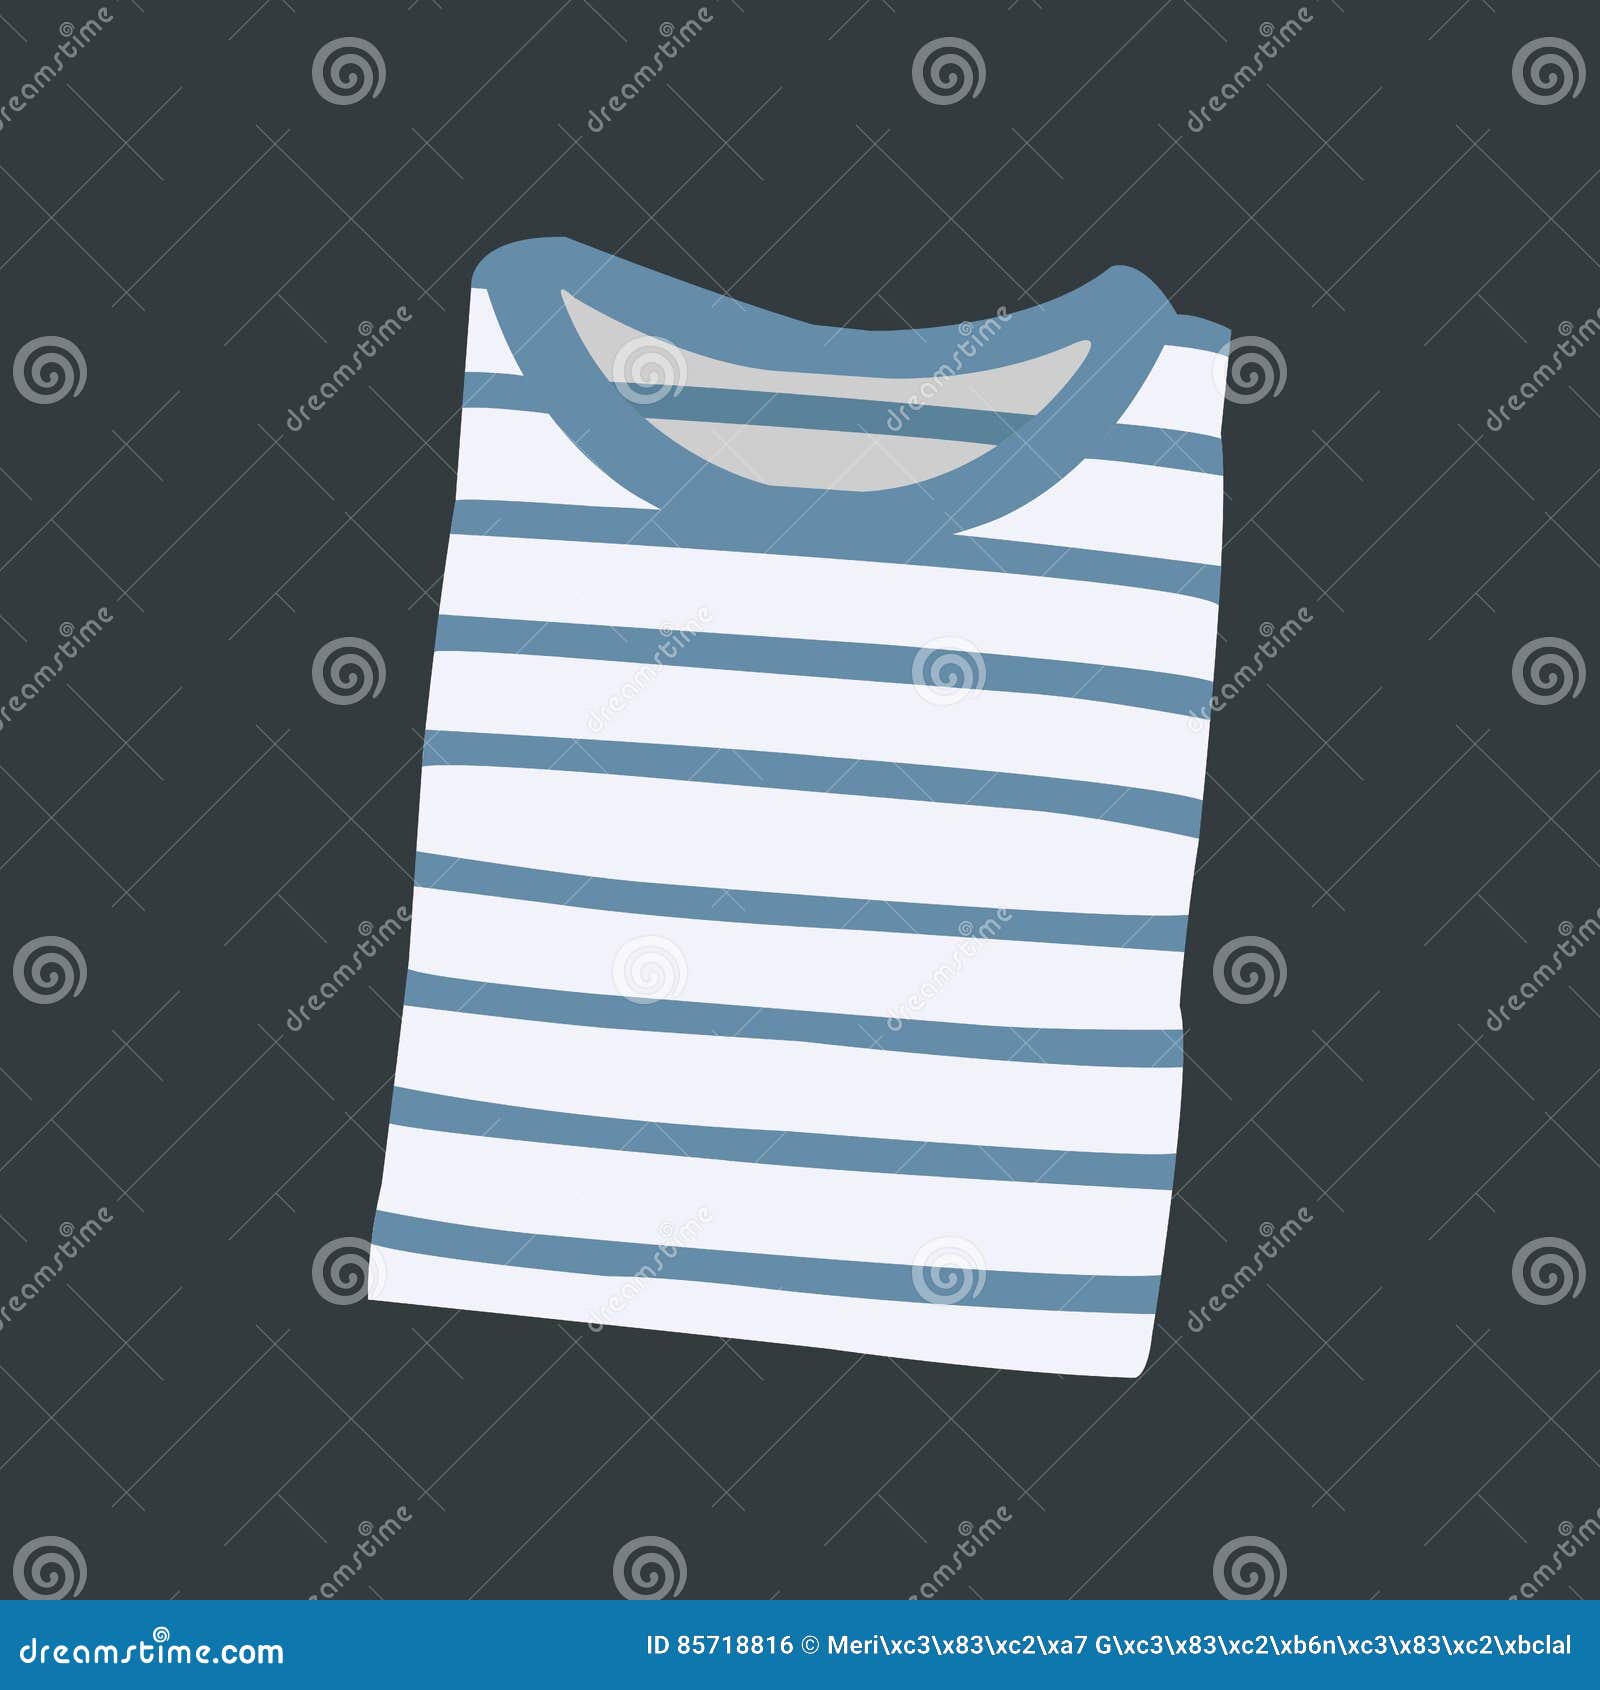 Blue and White Striped Tshirt Stock Vector - Illustration of striped ...